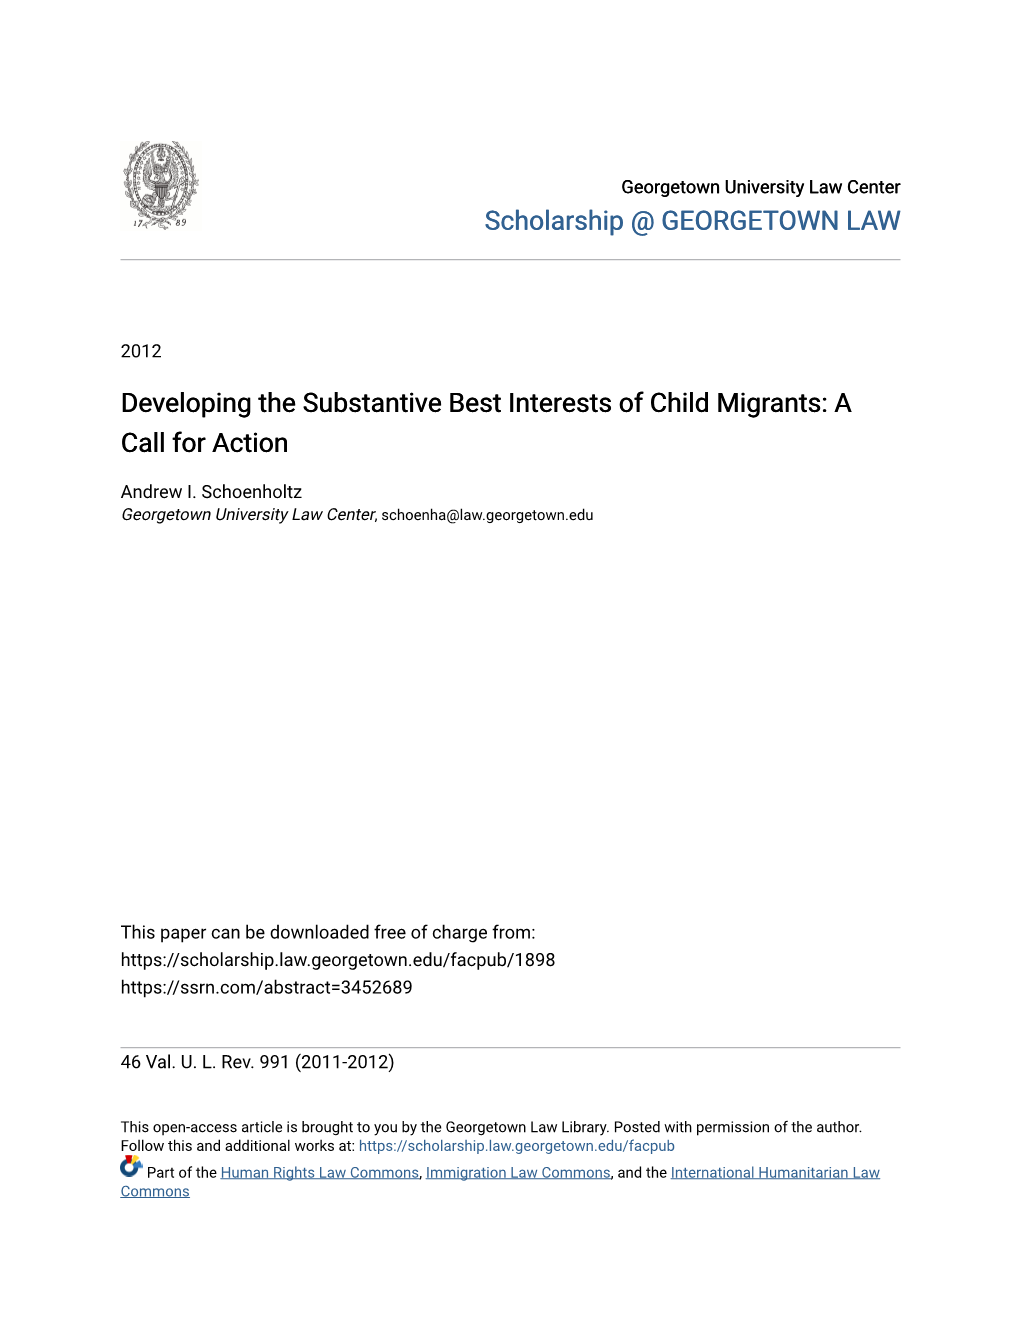 Developing the Substantive Best Interests of Child Migrants: a Call for Action